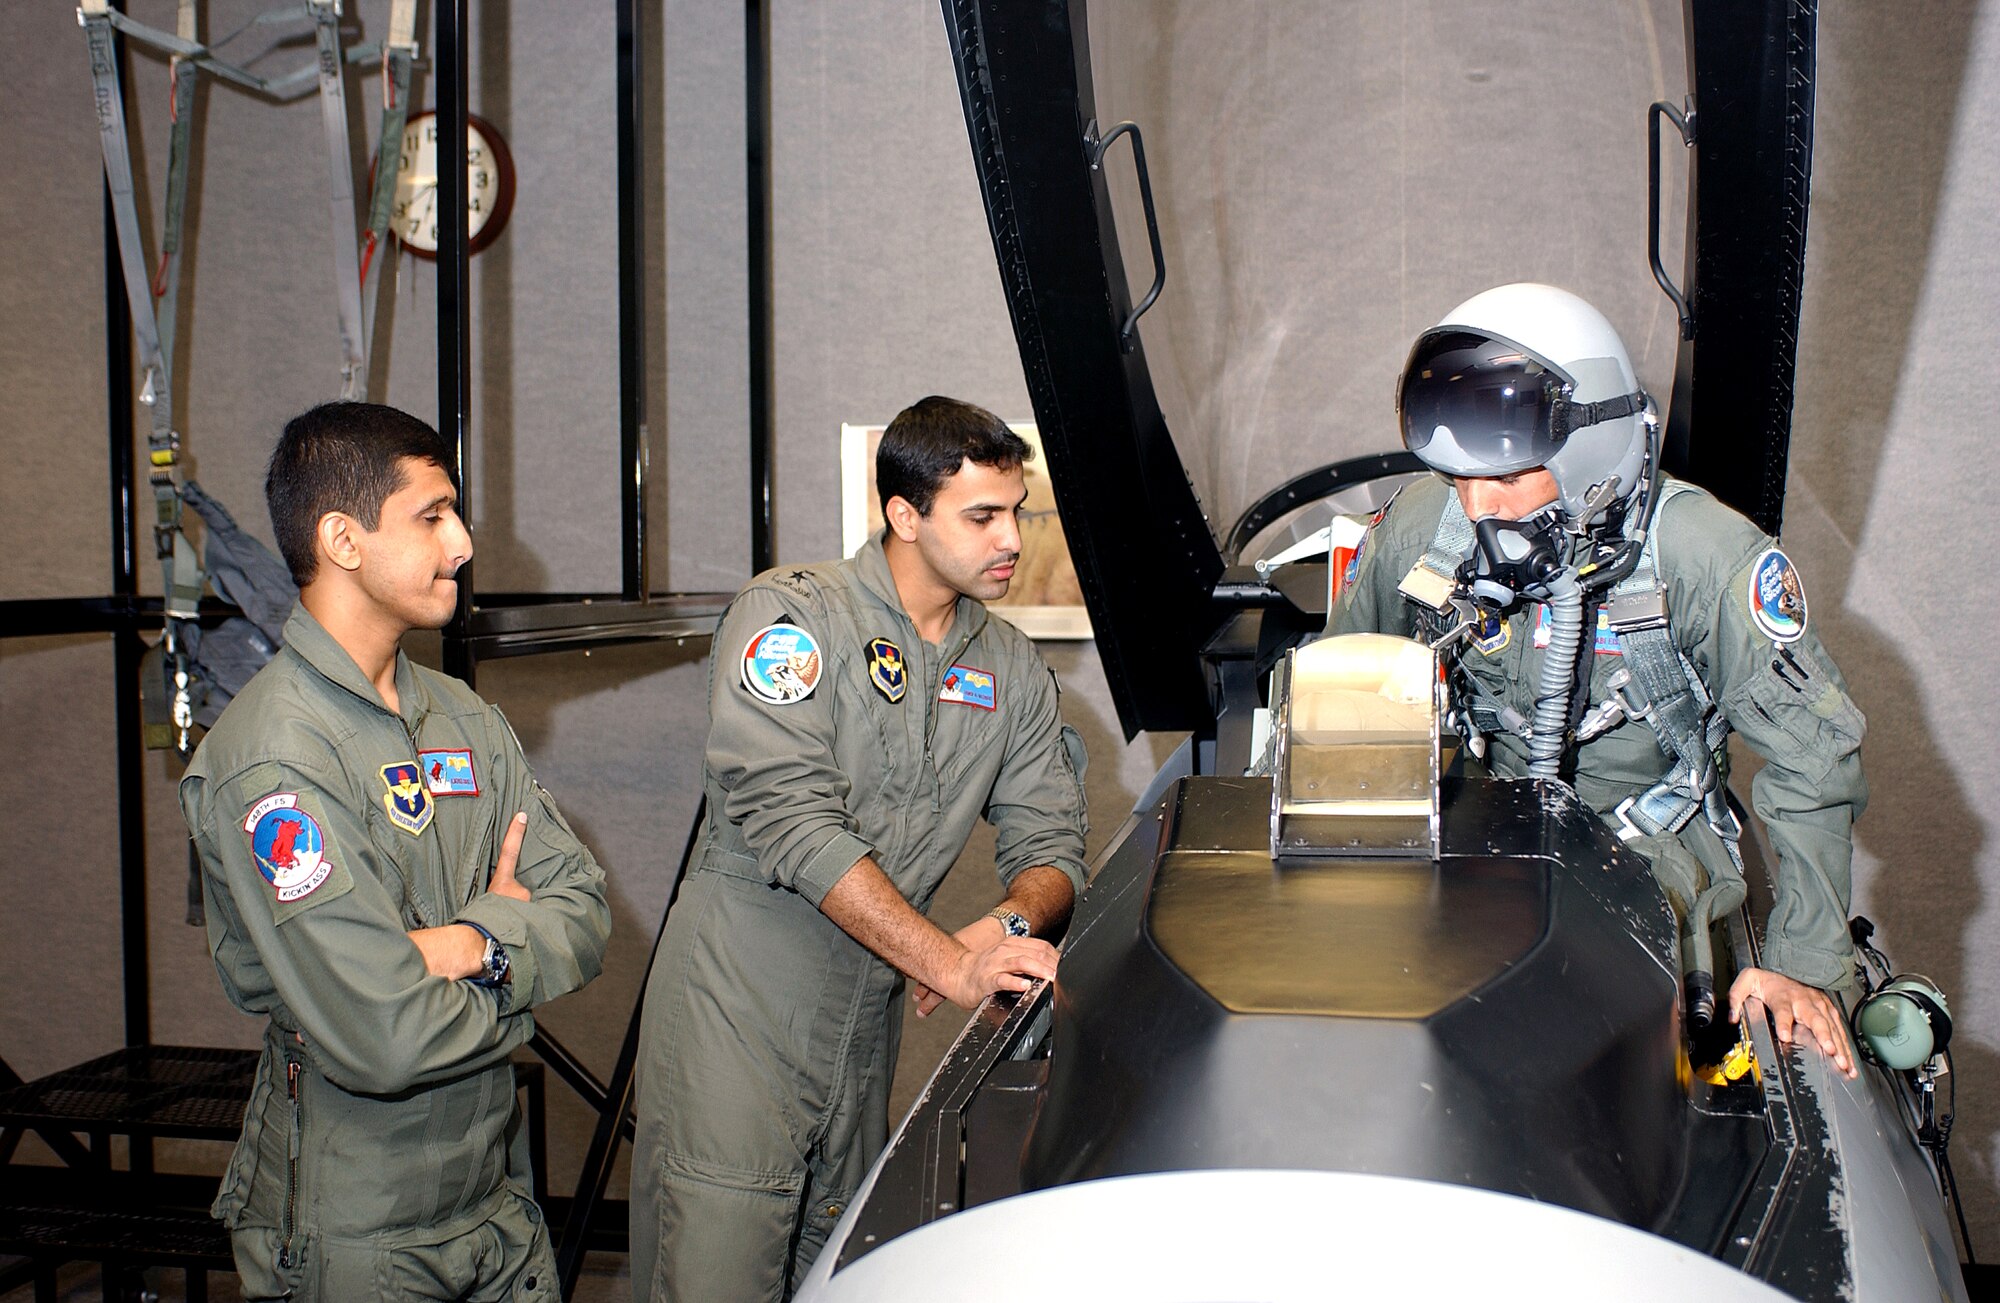 Three student pilots from the United Arab Emirates practice emergency egress procedures as part of their F-16 flight training at the 162nd Fighter Wing in Tucson, Ariz. The Air Guard unit has trained foreign pilots since 1989. (Air National Guard Photo by Master Sgt. Dave Neve)